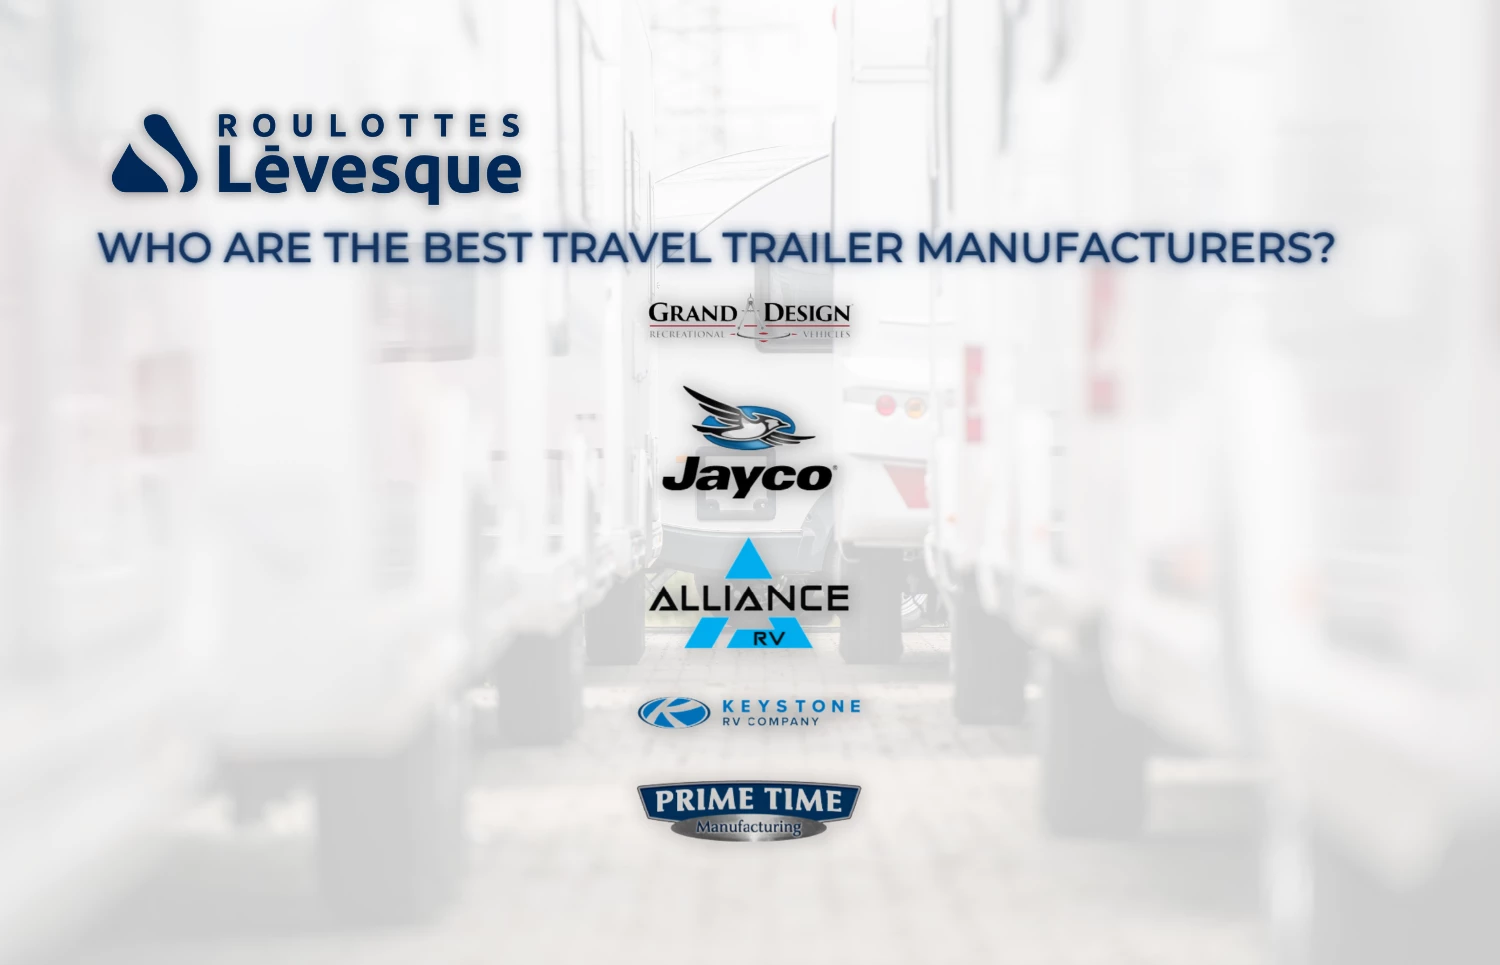 Discover who are the best travel trailer manufacturers available at Roulotte.ca